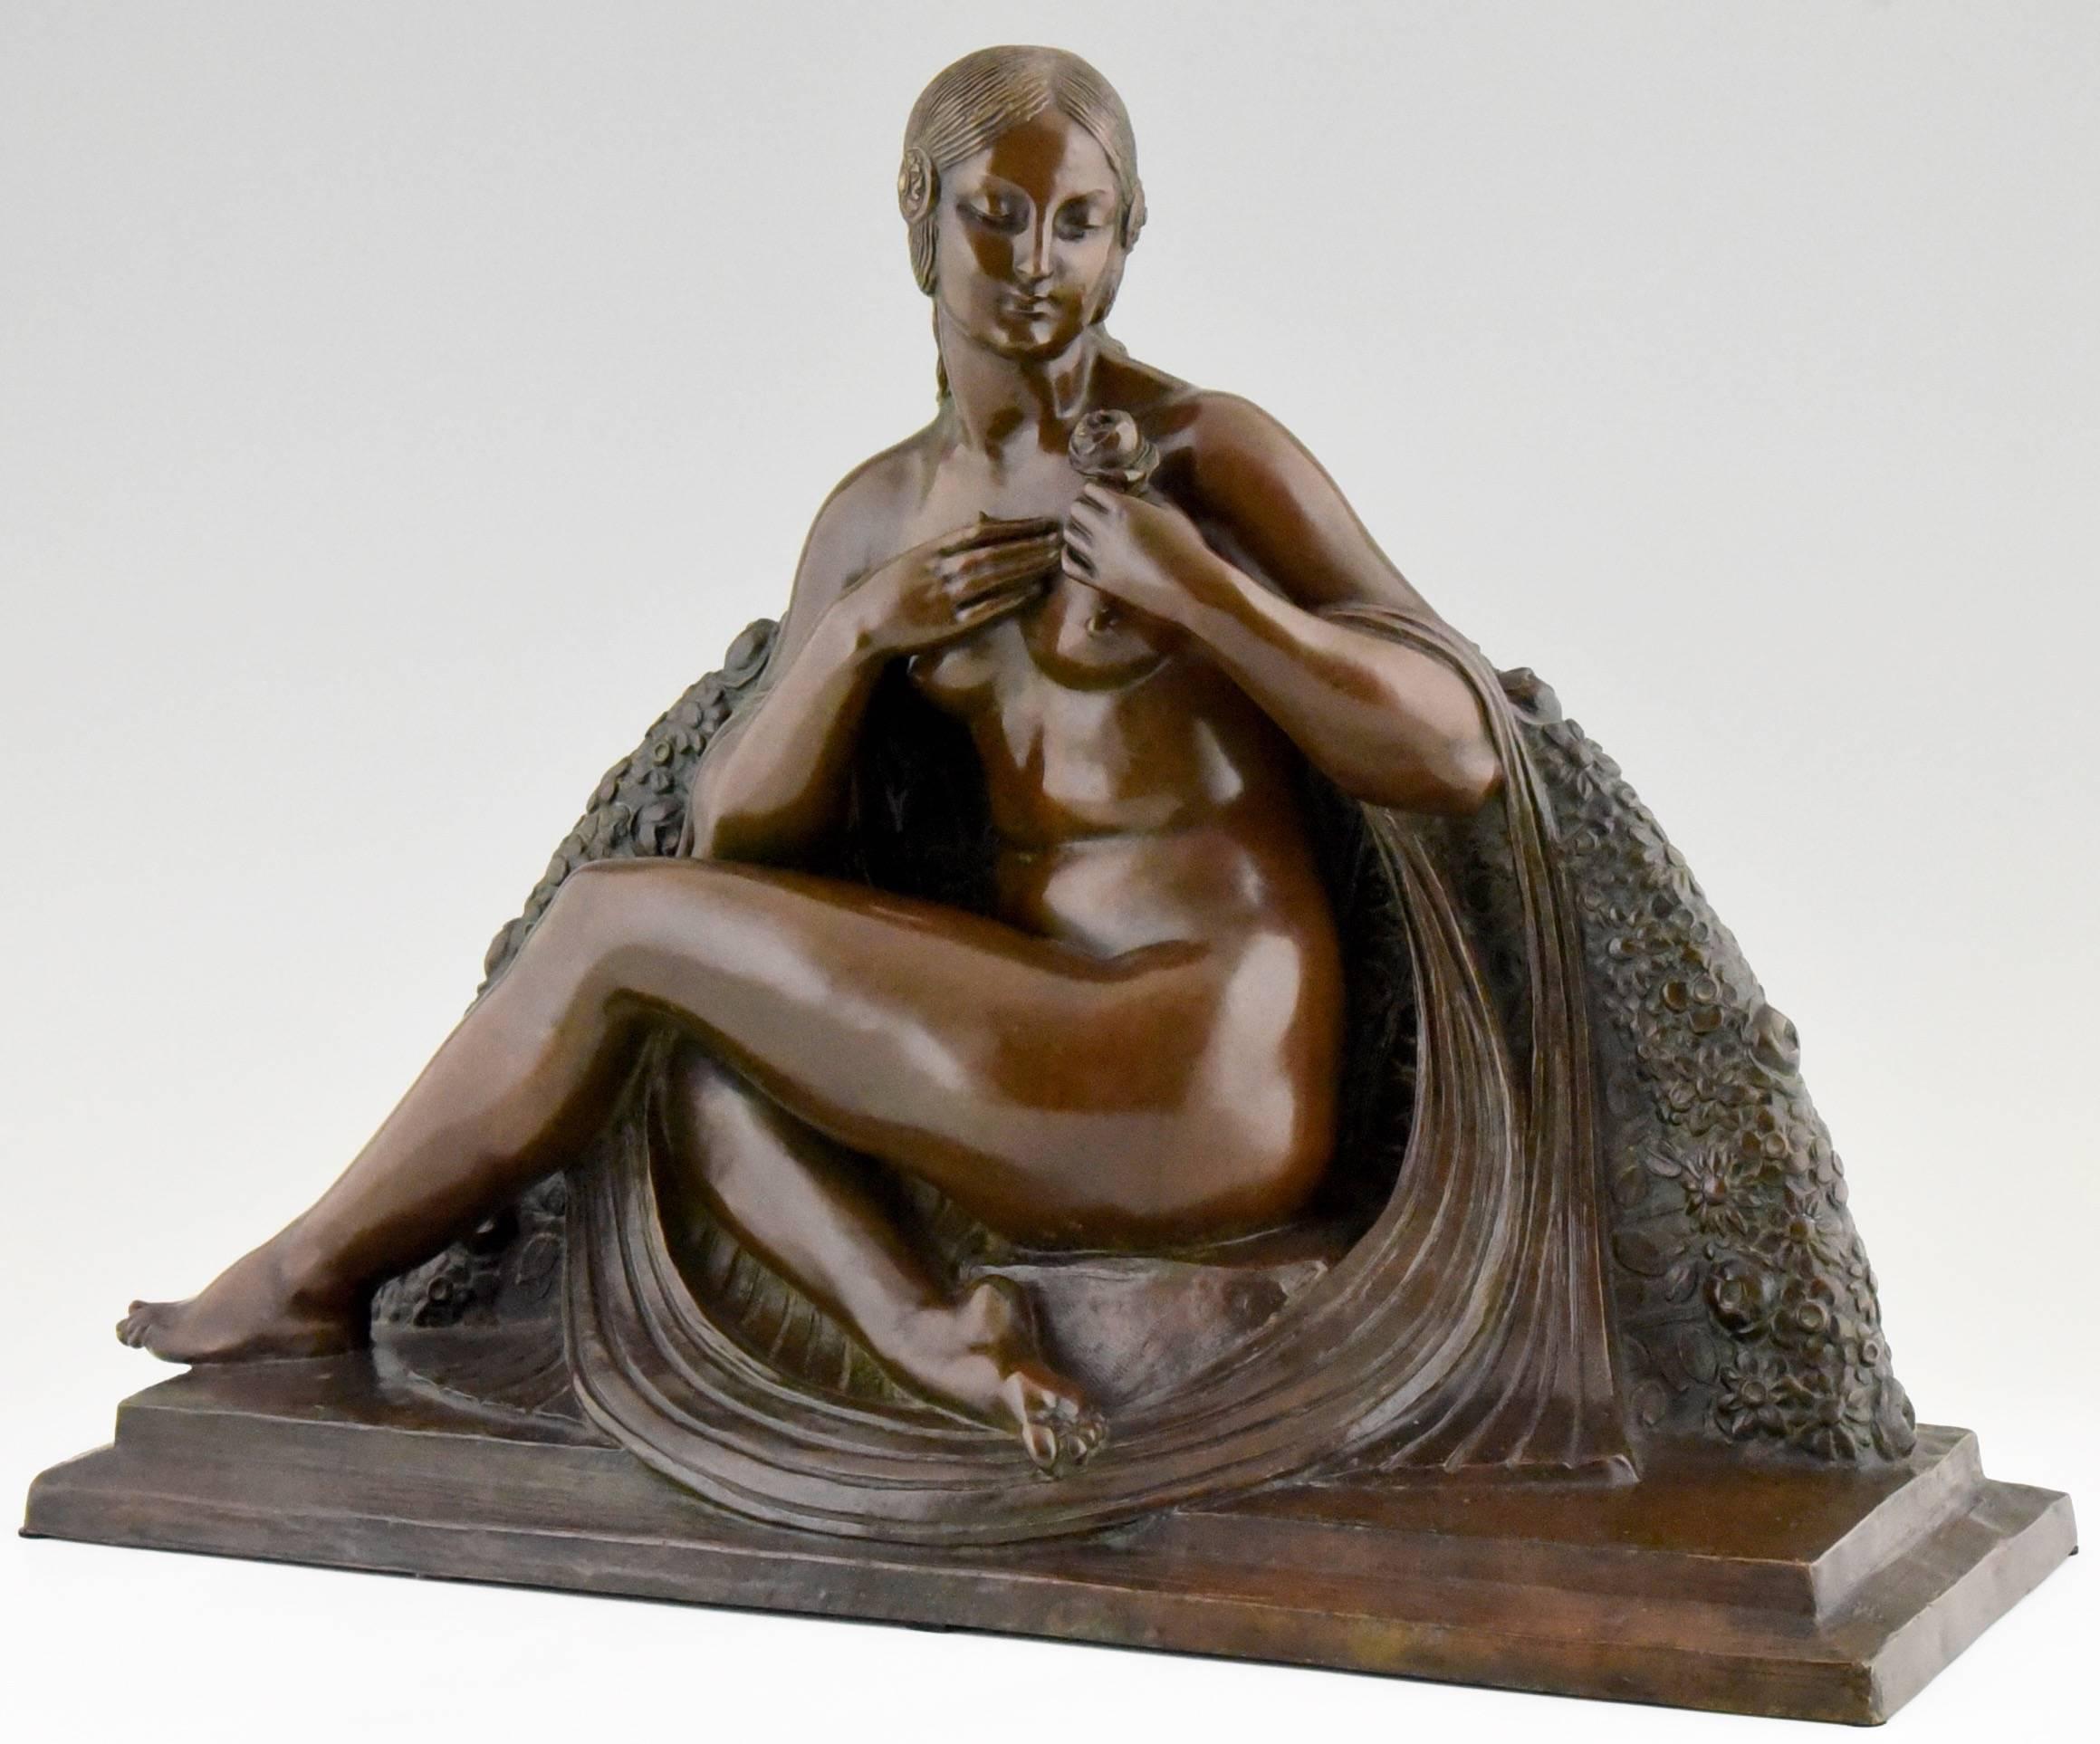 Patinated Art Deco Sculpture of a Seated Nude by Joe Descomps, Etling Foundry France 1925